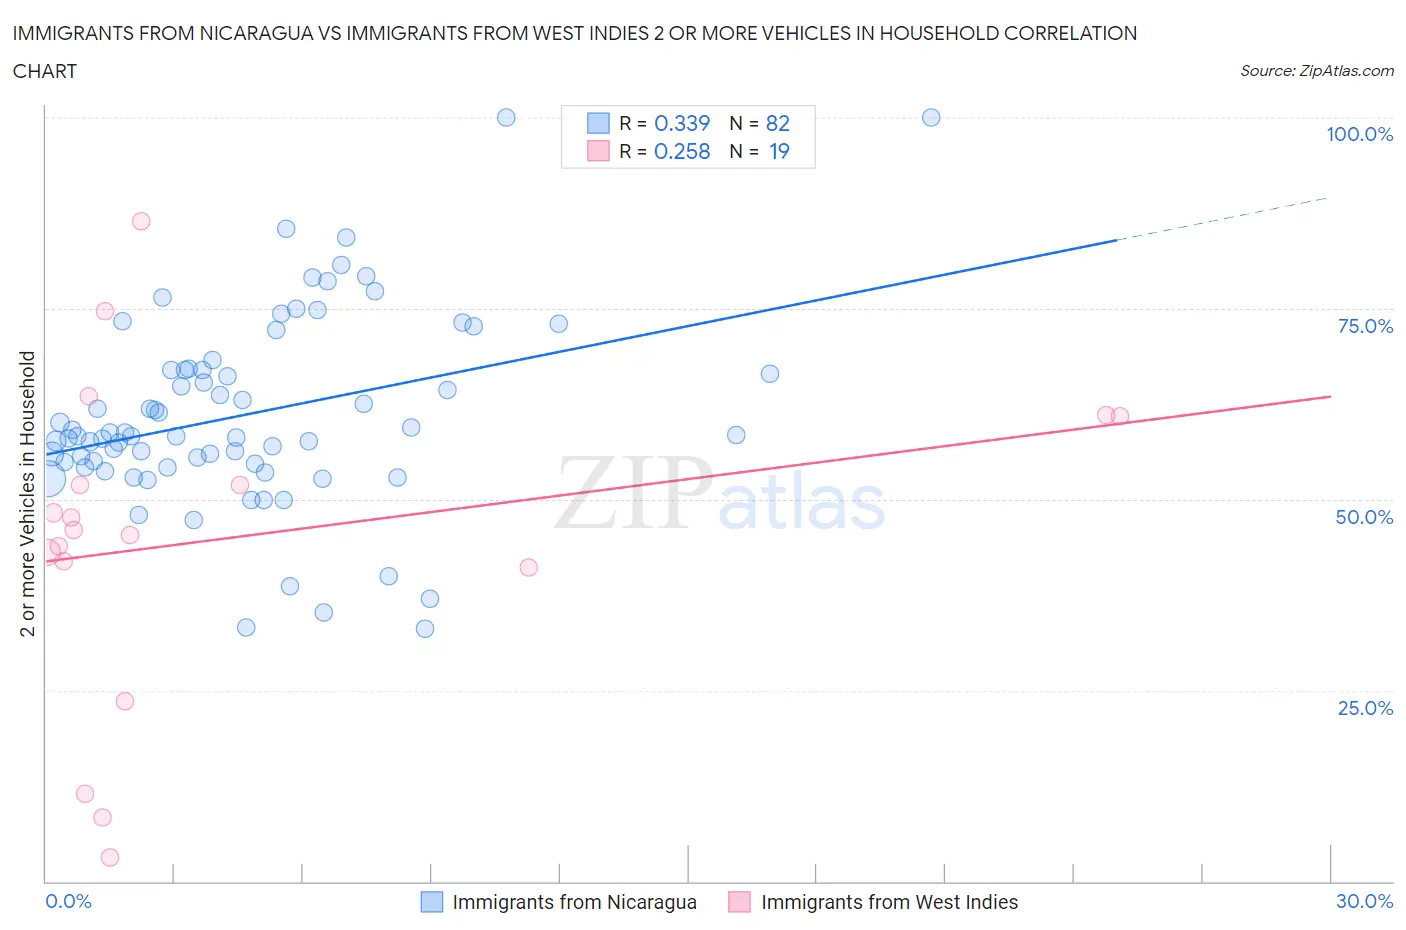 Immigrants from Nicaragua vs Immigrants from West Indies 2 or more Vehicles in Household